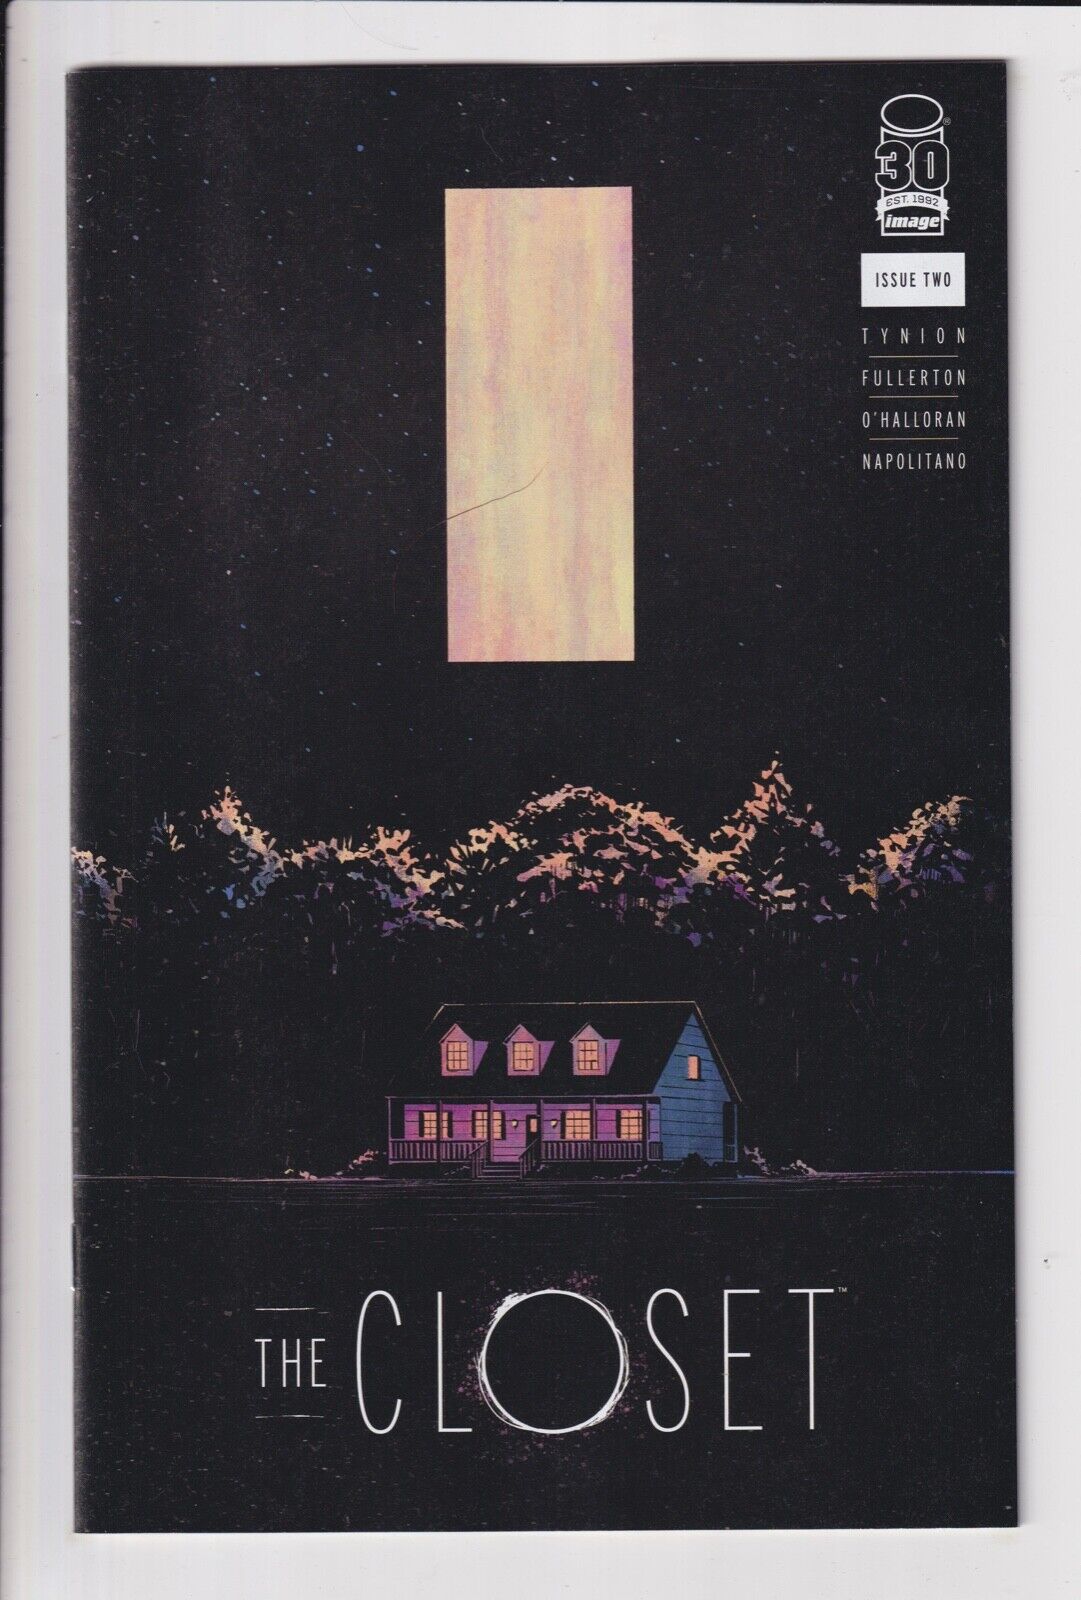 THE CLOSET 1 2 or 3 NM 2022 Tynion Image comics sold SEPARATELY you PICK